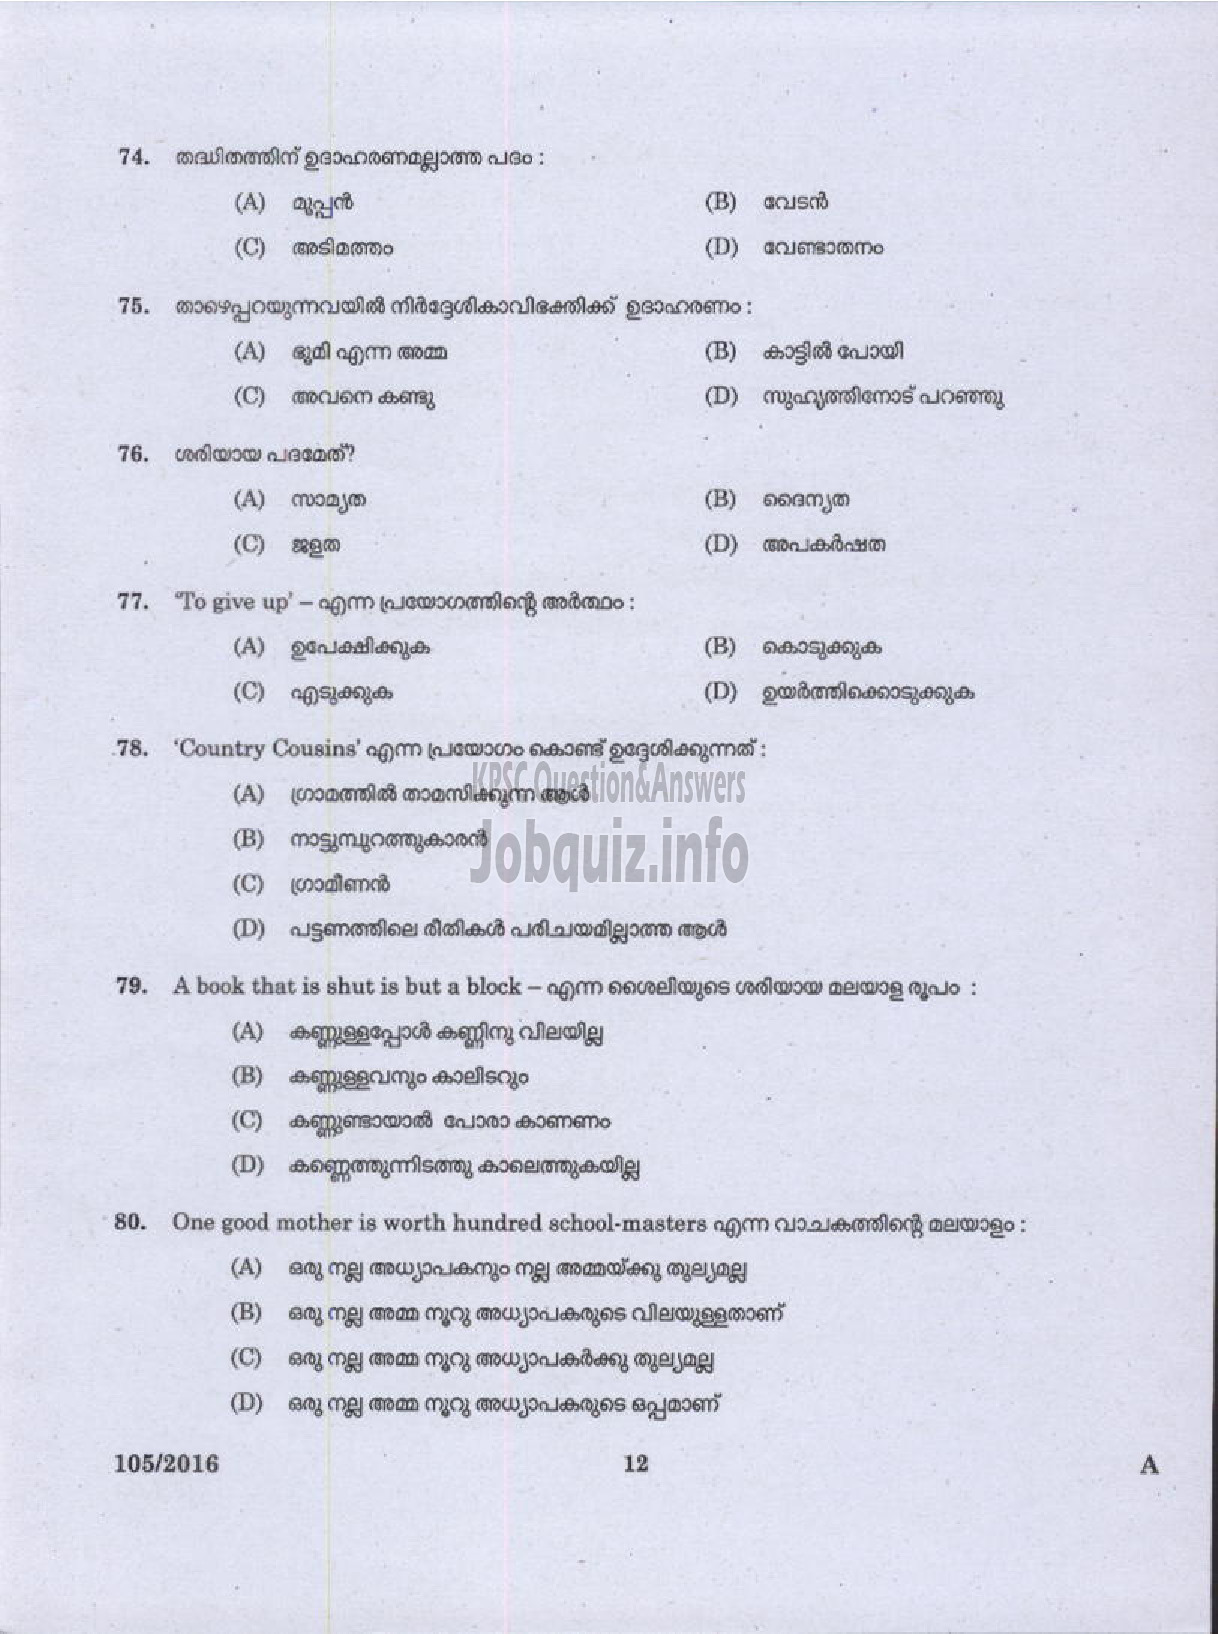 Kerala PSC Question Paper - LOWER DIVISION CLERK KANNADA AND MALAYALAM KNOWING VARIOUS-10